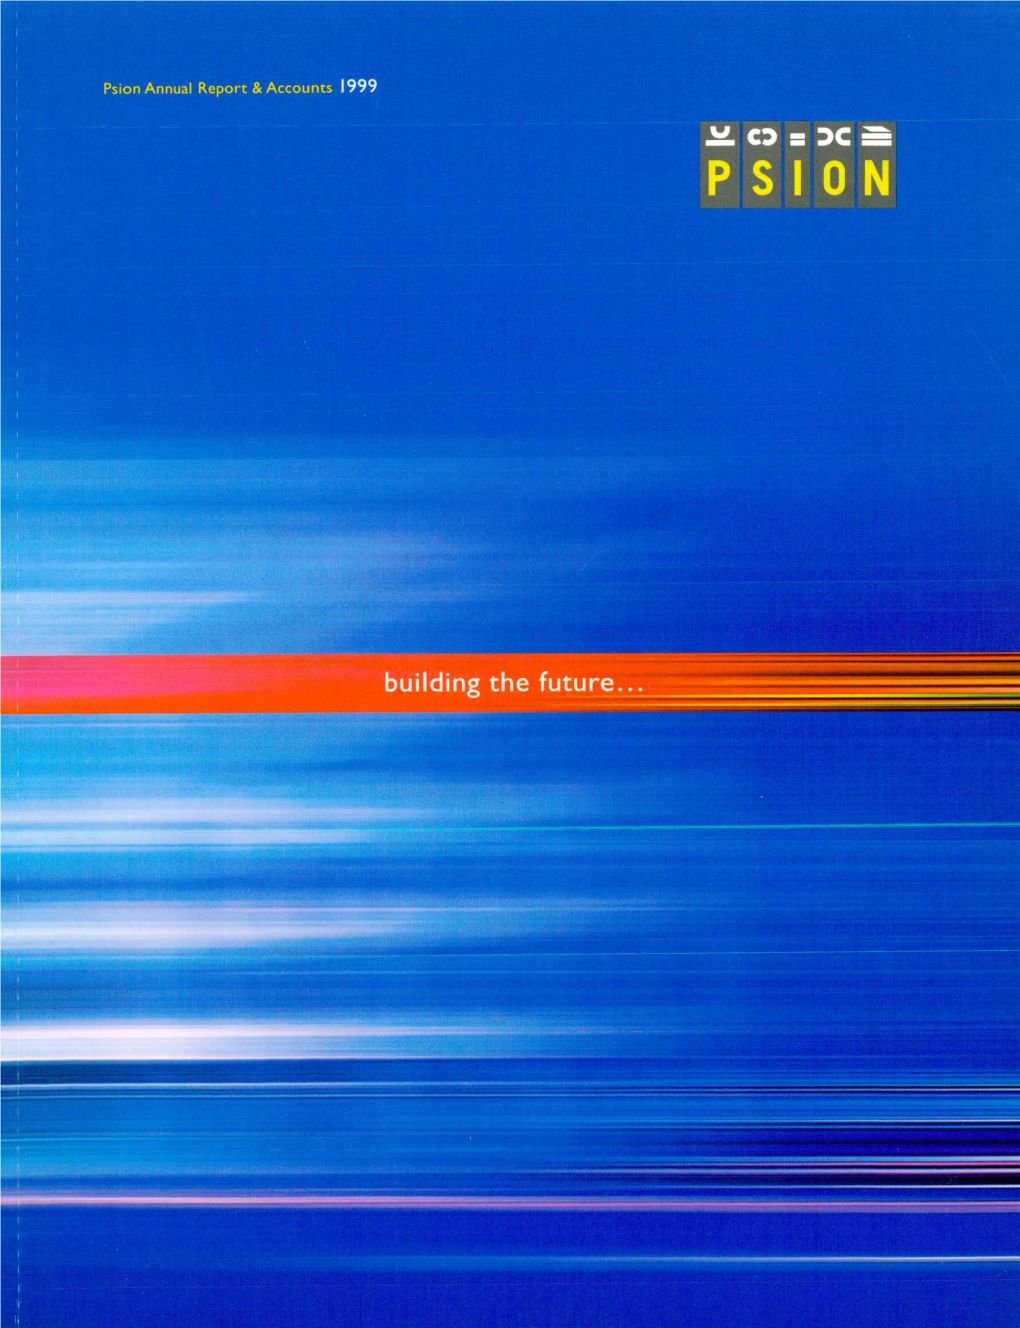 PSION Annual Report 1999